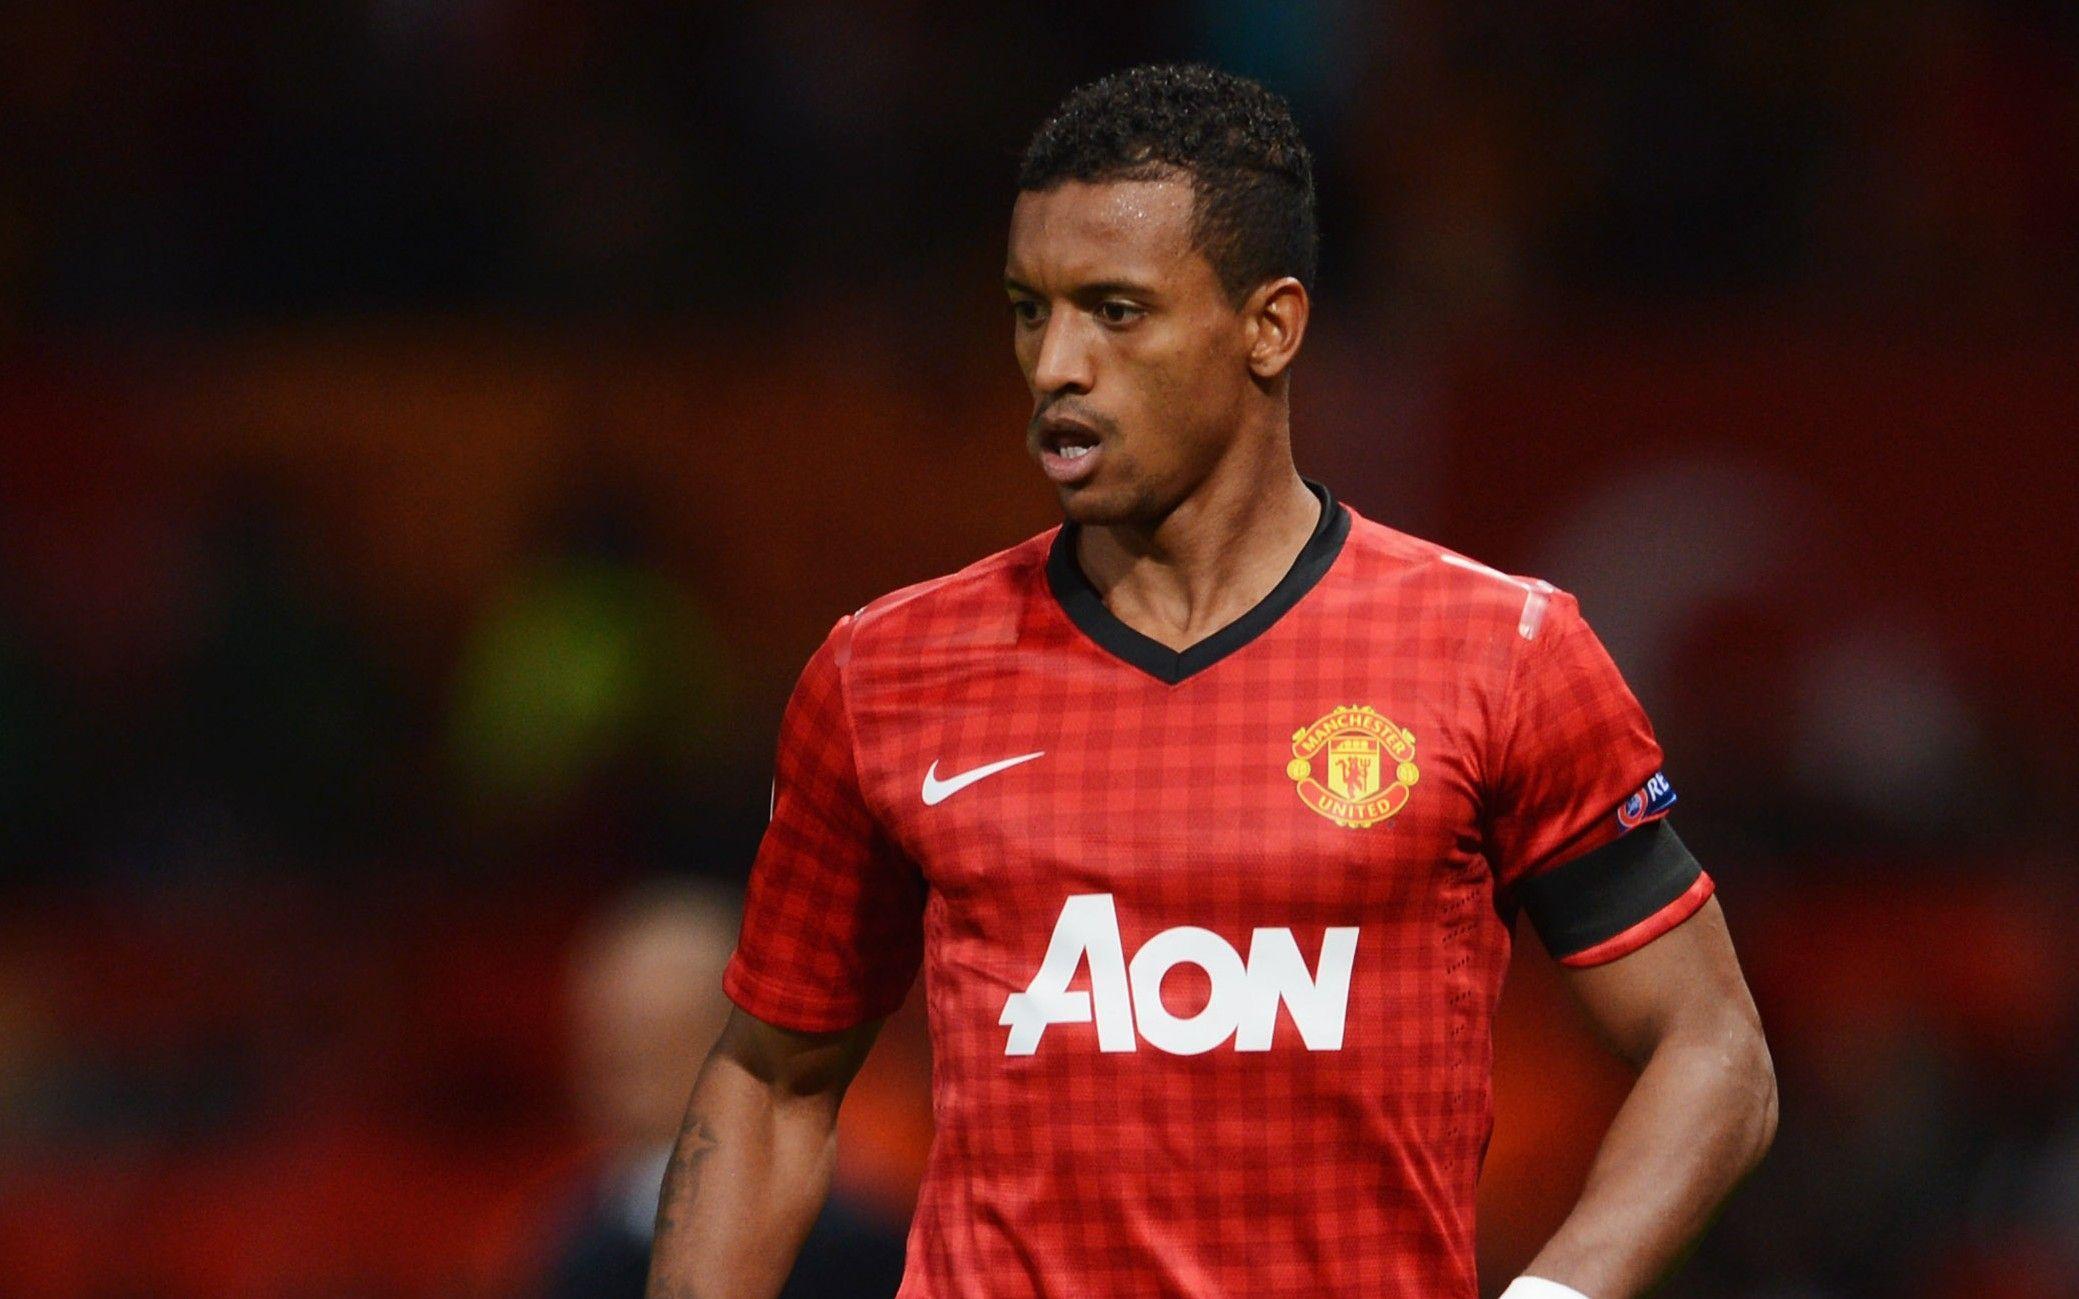 The player of Manchester United Luis Nani wallpaper and image